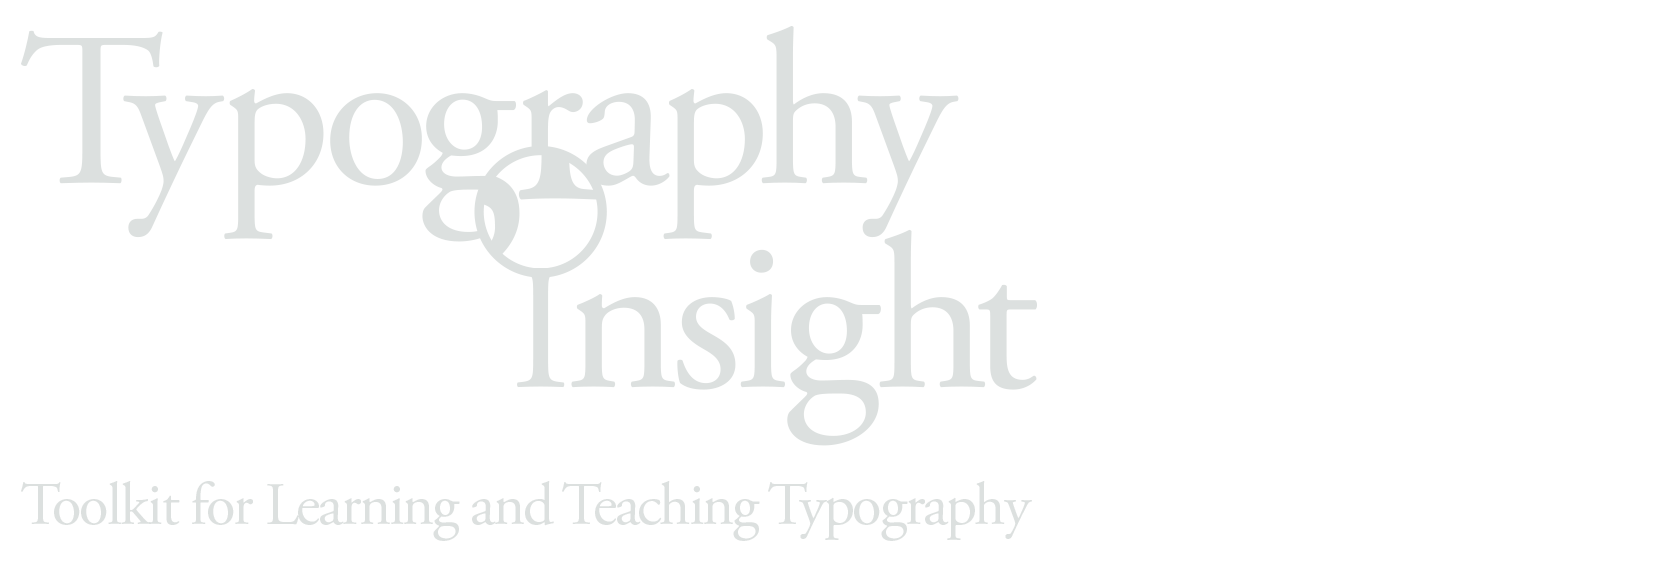 Typography Insight for iPad, iPhone, iOS, Mac OS